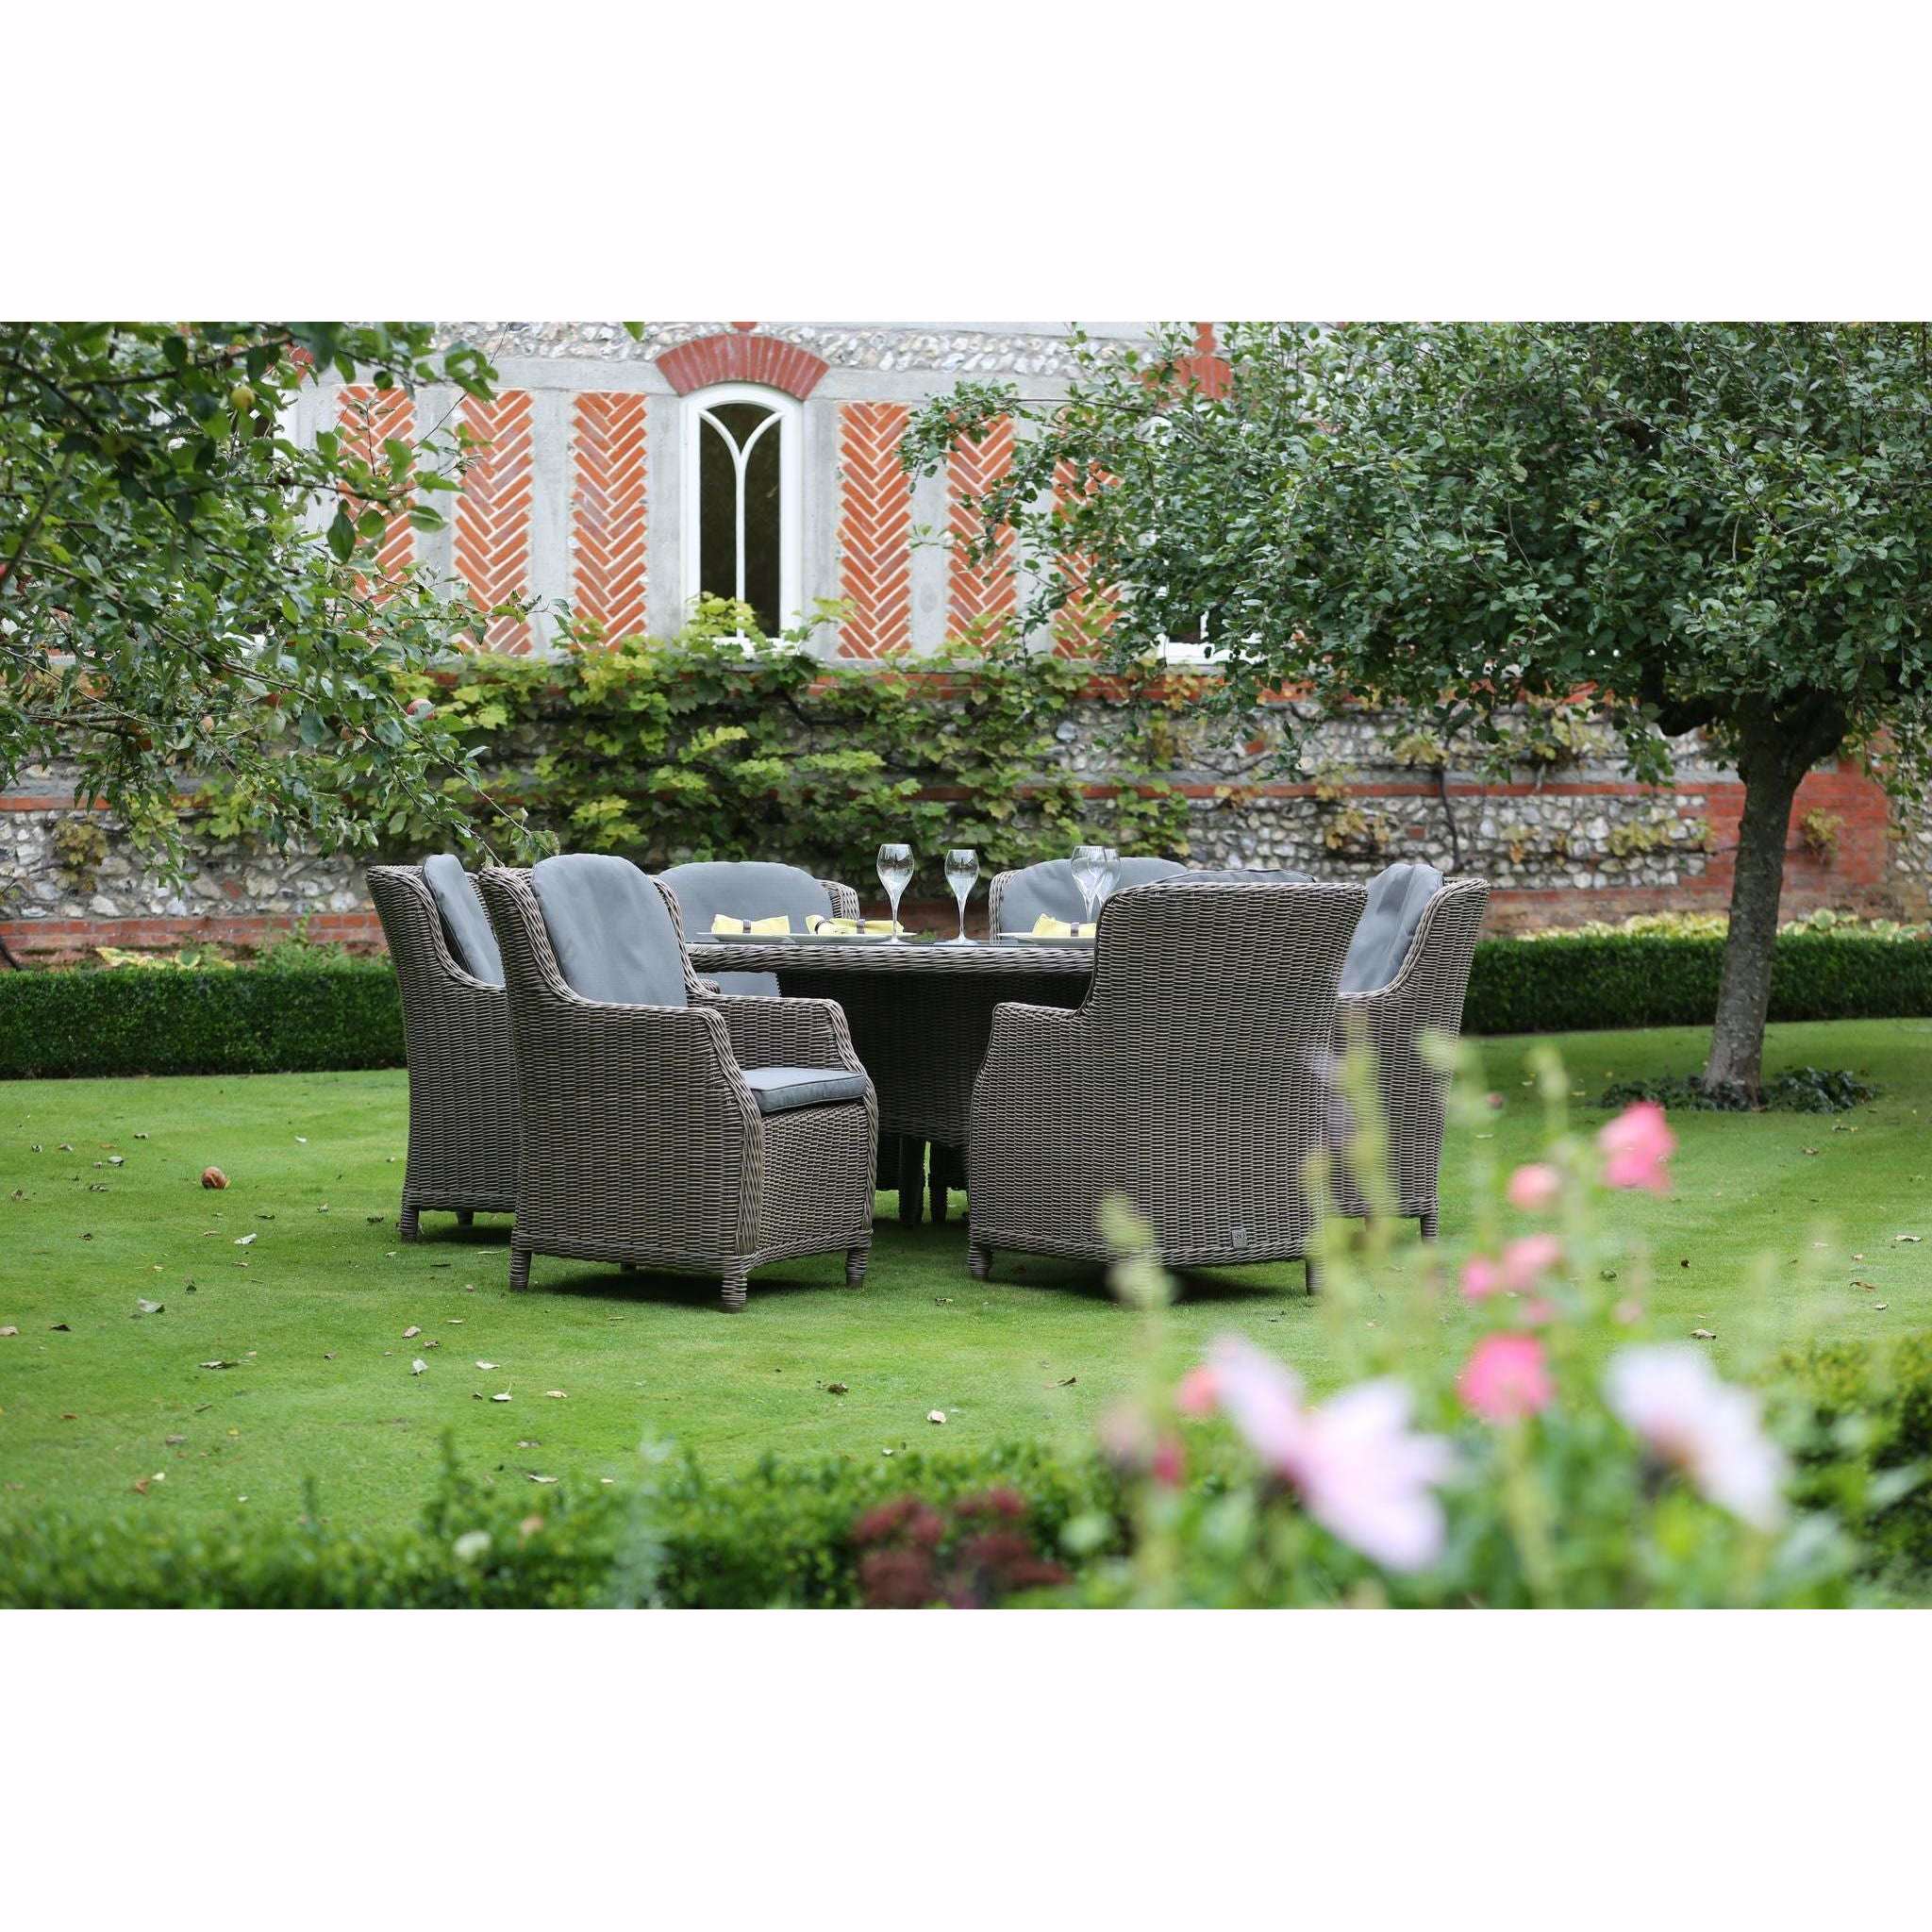 Exceptional Garden:4 Seasons Outdoor Brighton 6 Seater Dining set with Victoria Table